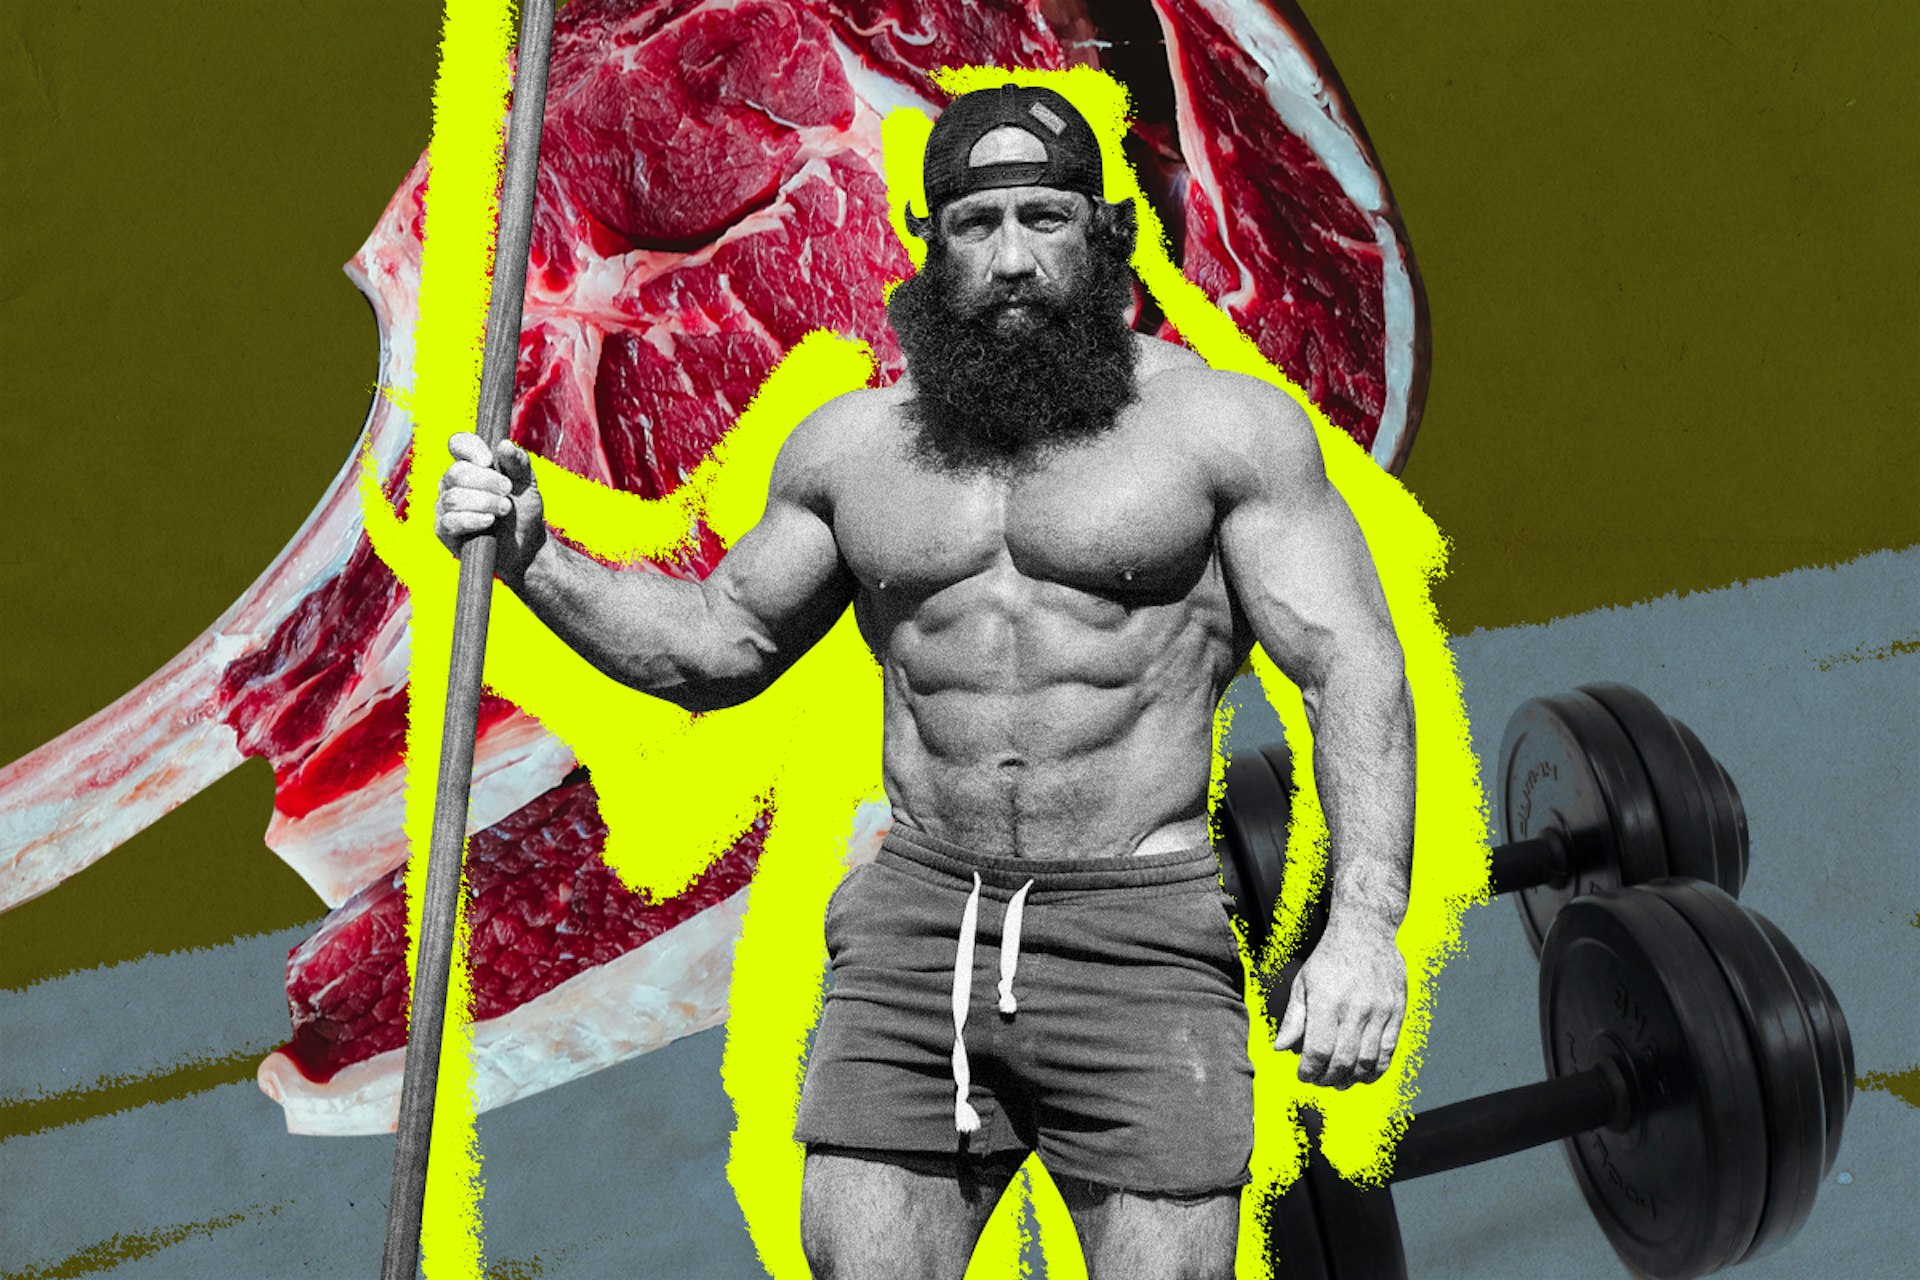 Liver King and the problematic rise of primal manhood